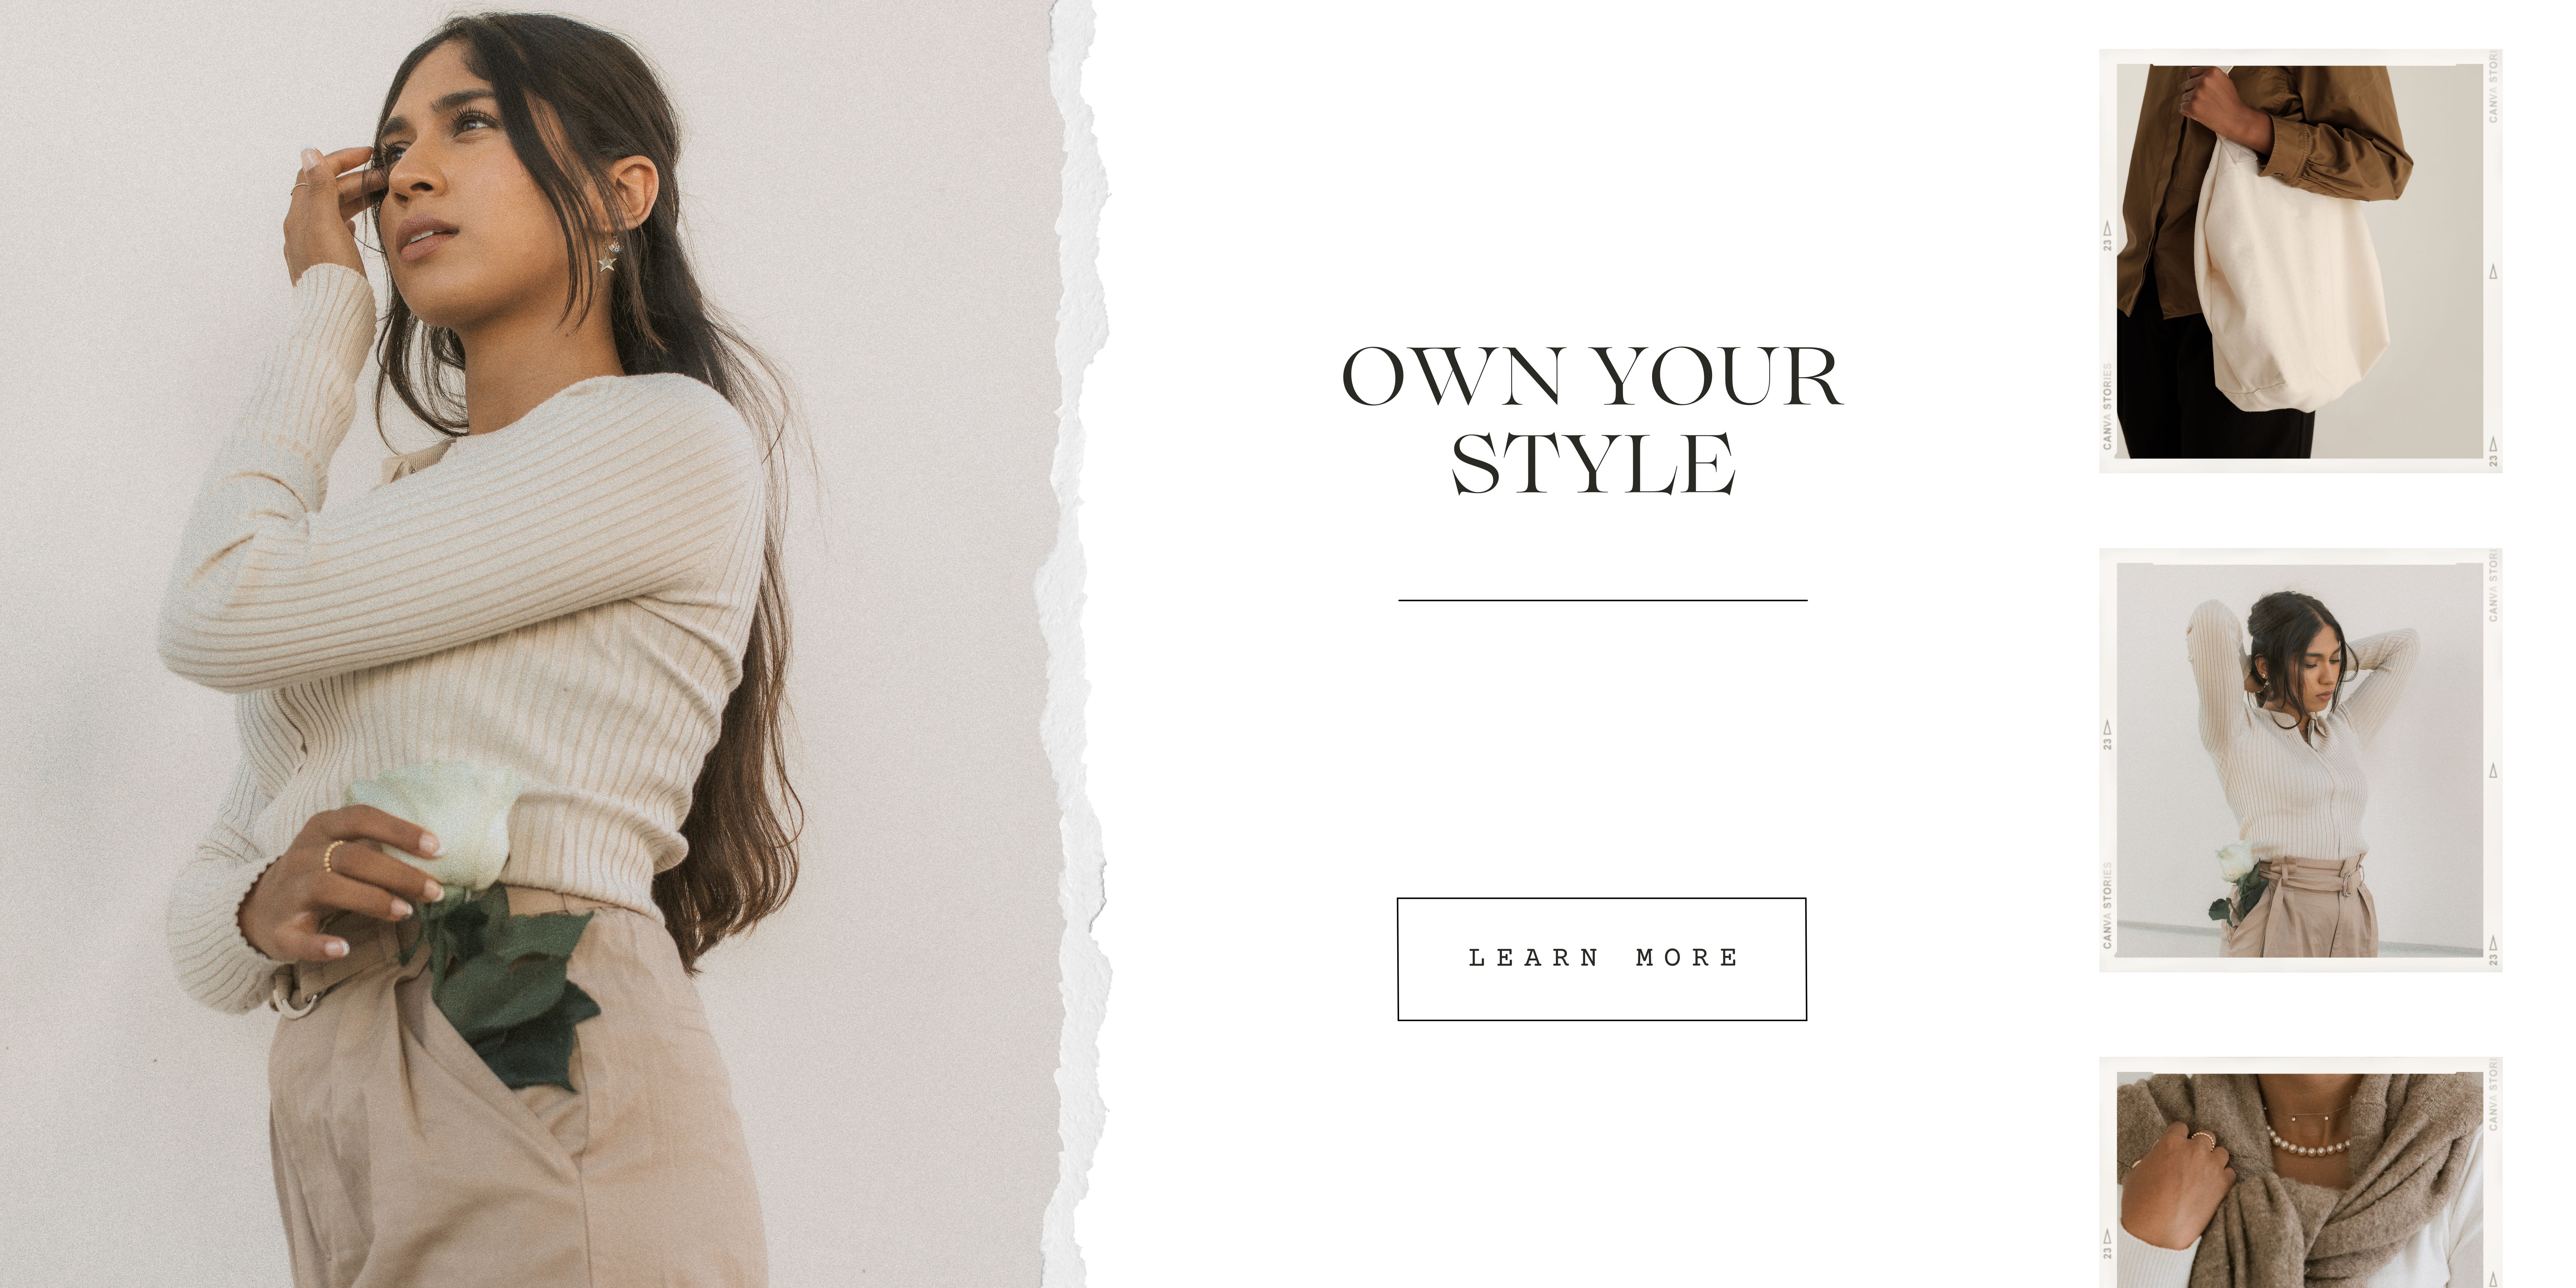 Own Your Style: Be Unforgettable